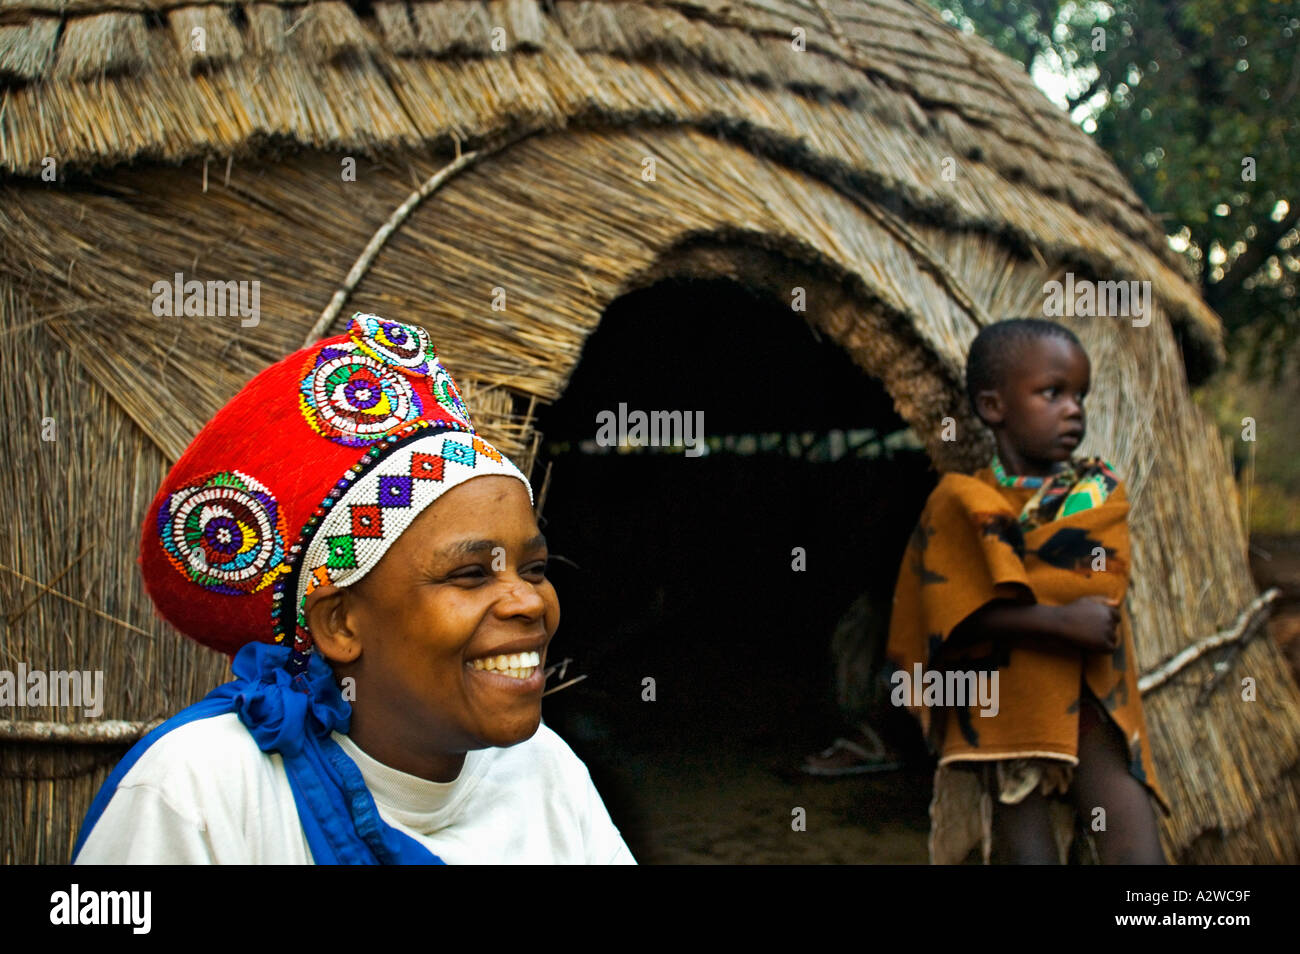 Zulu woman in traditional red headdress of a married woman with children Model released South Africa Stock Photo